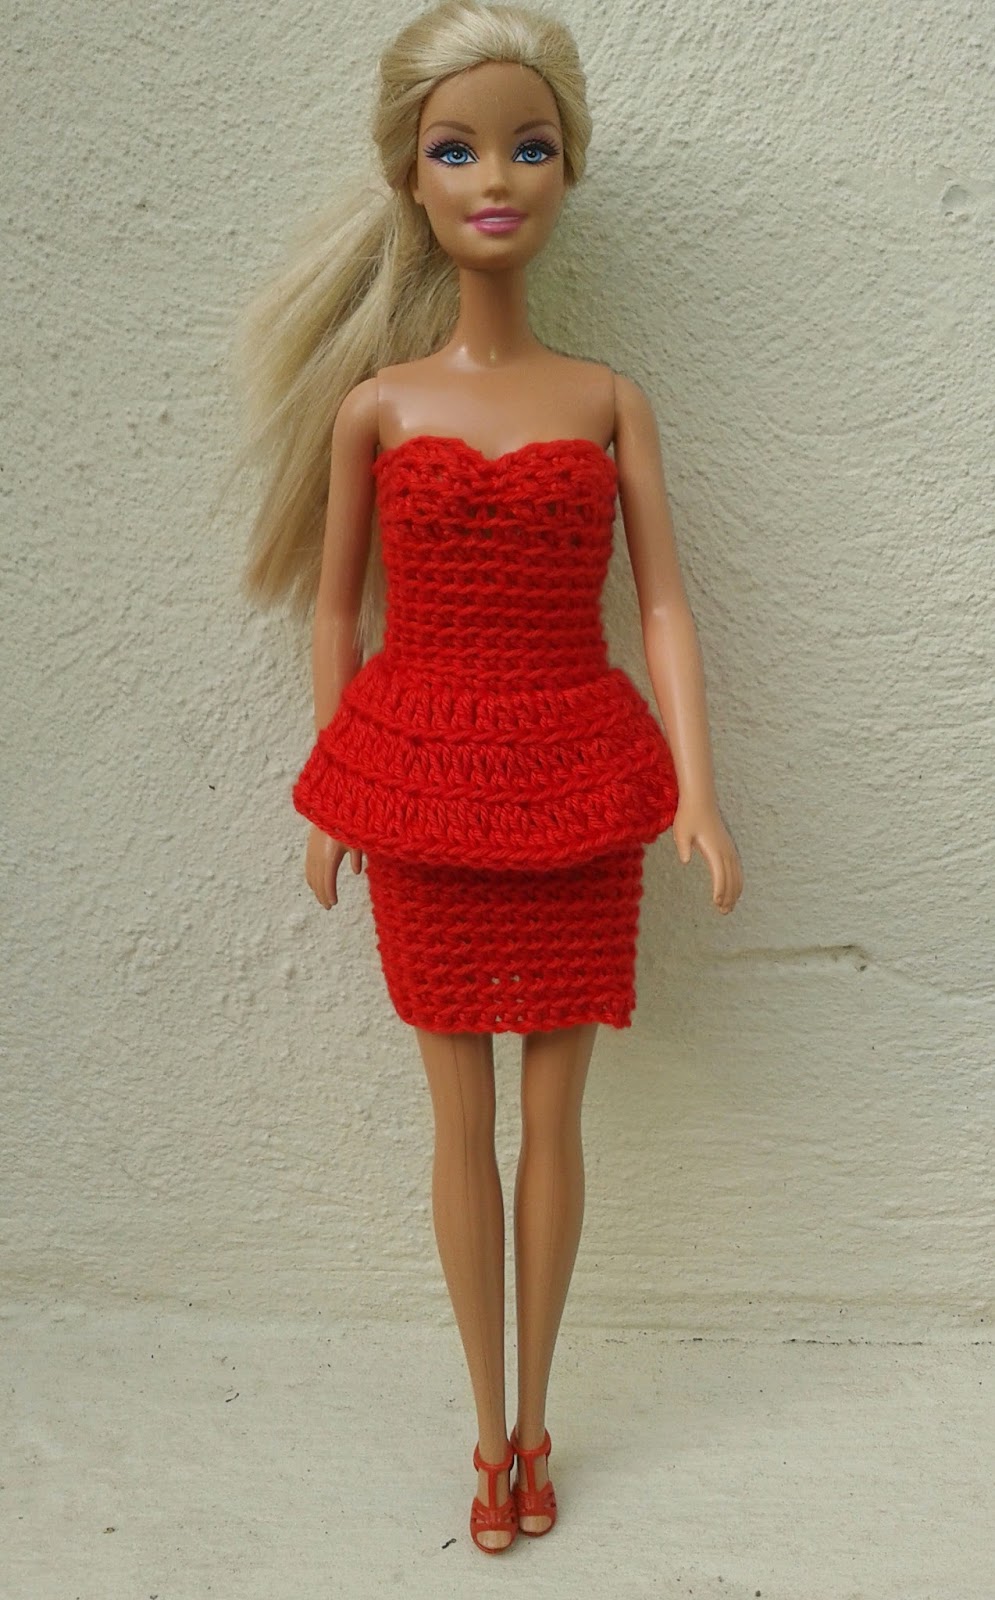 Linmary Knits Barbie en robes rouges au crochet